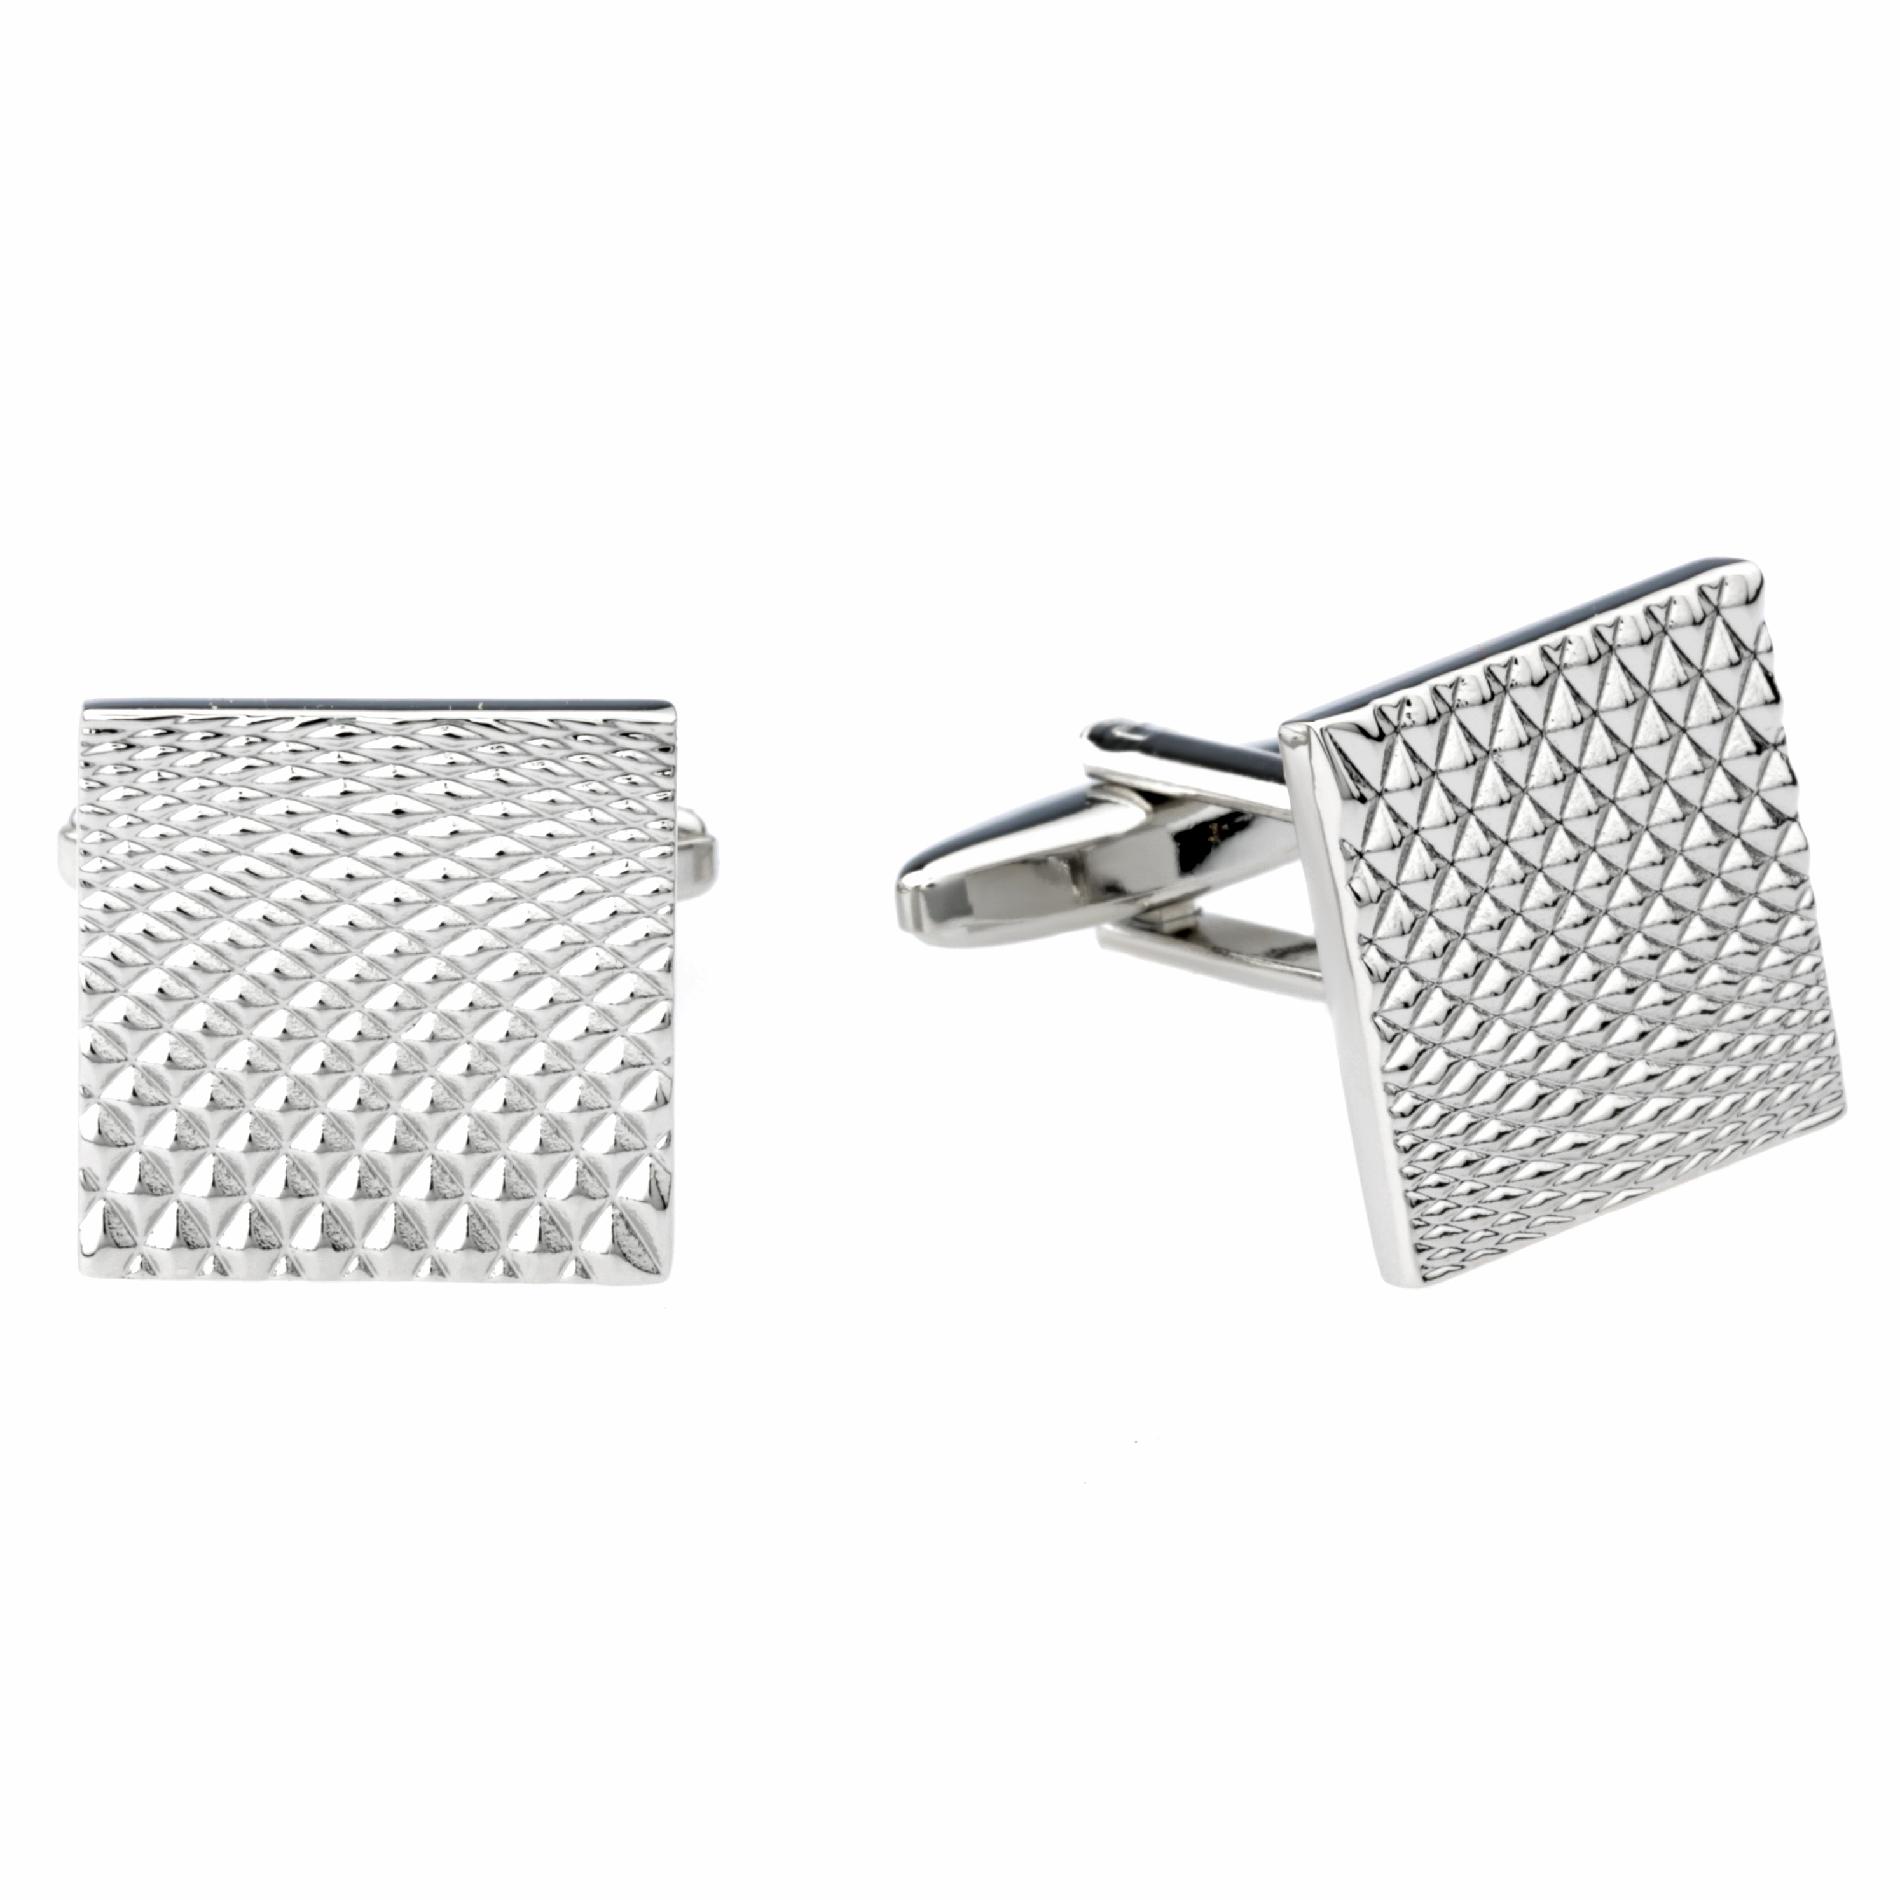 Riveted Texture Cuff Links in Stainless Steel